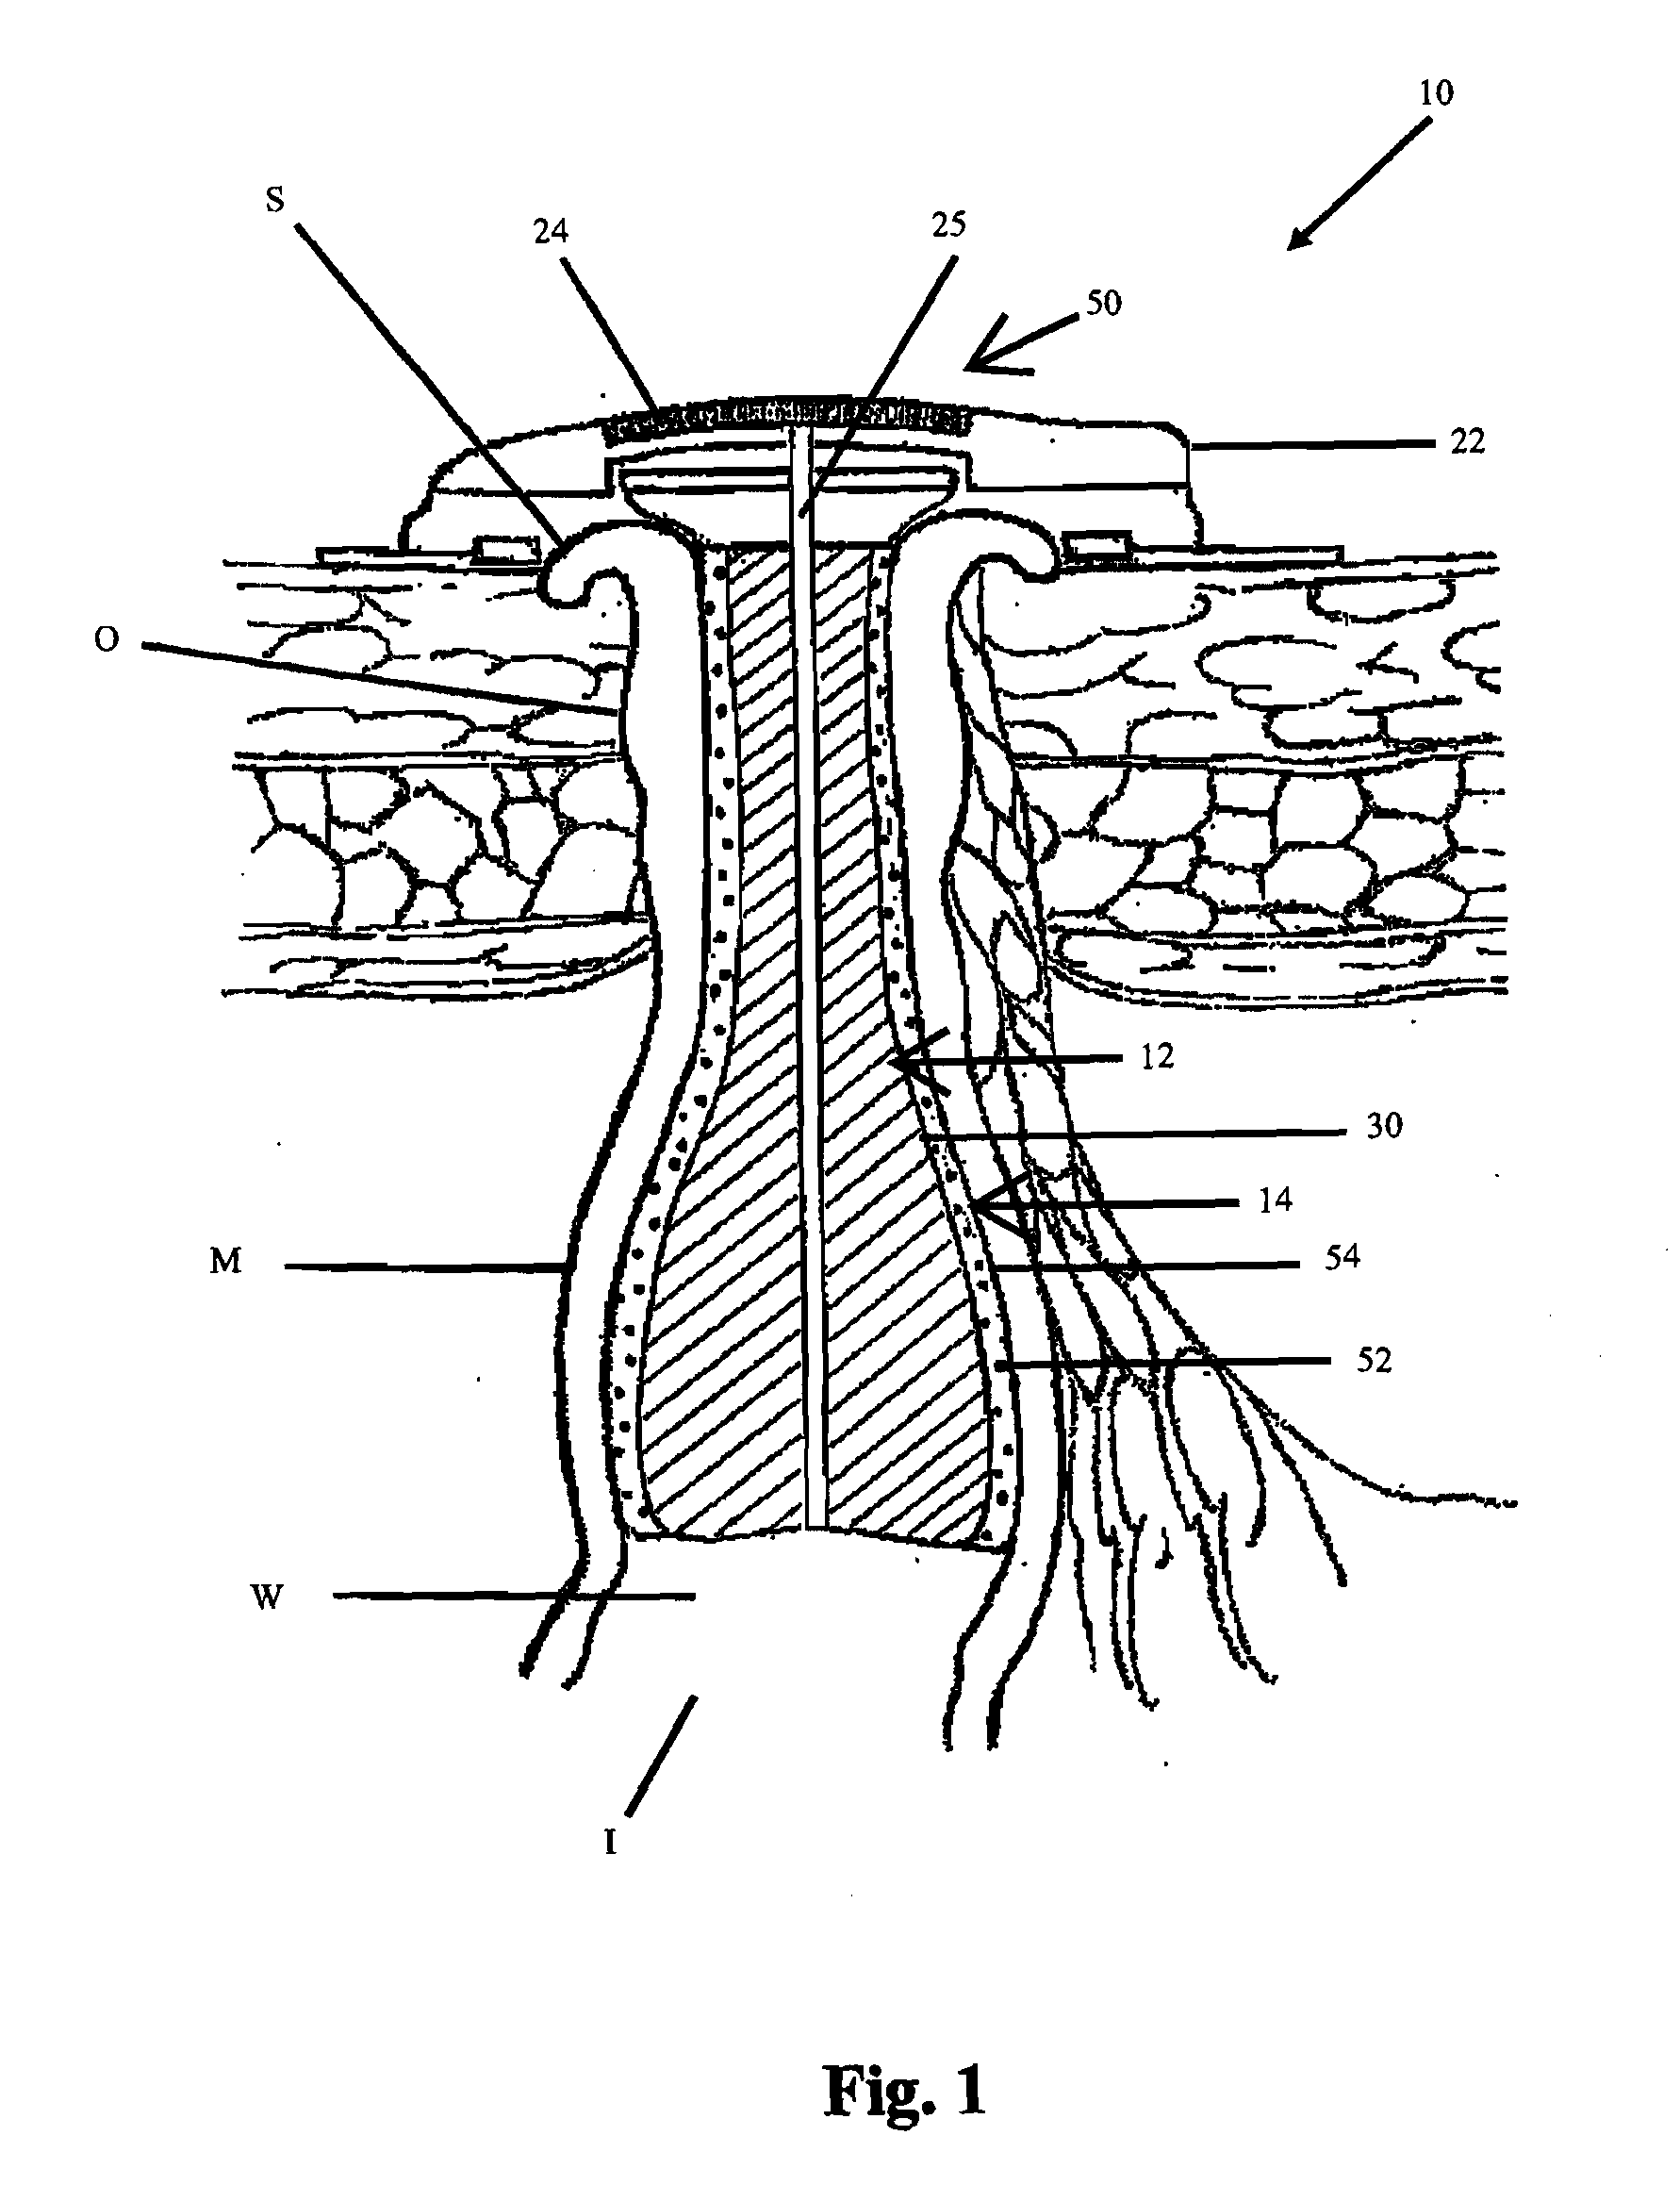 Continent ostomy system with chemical neuromuscular control